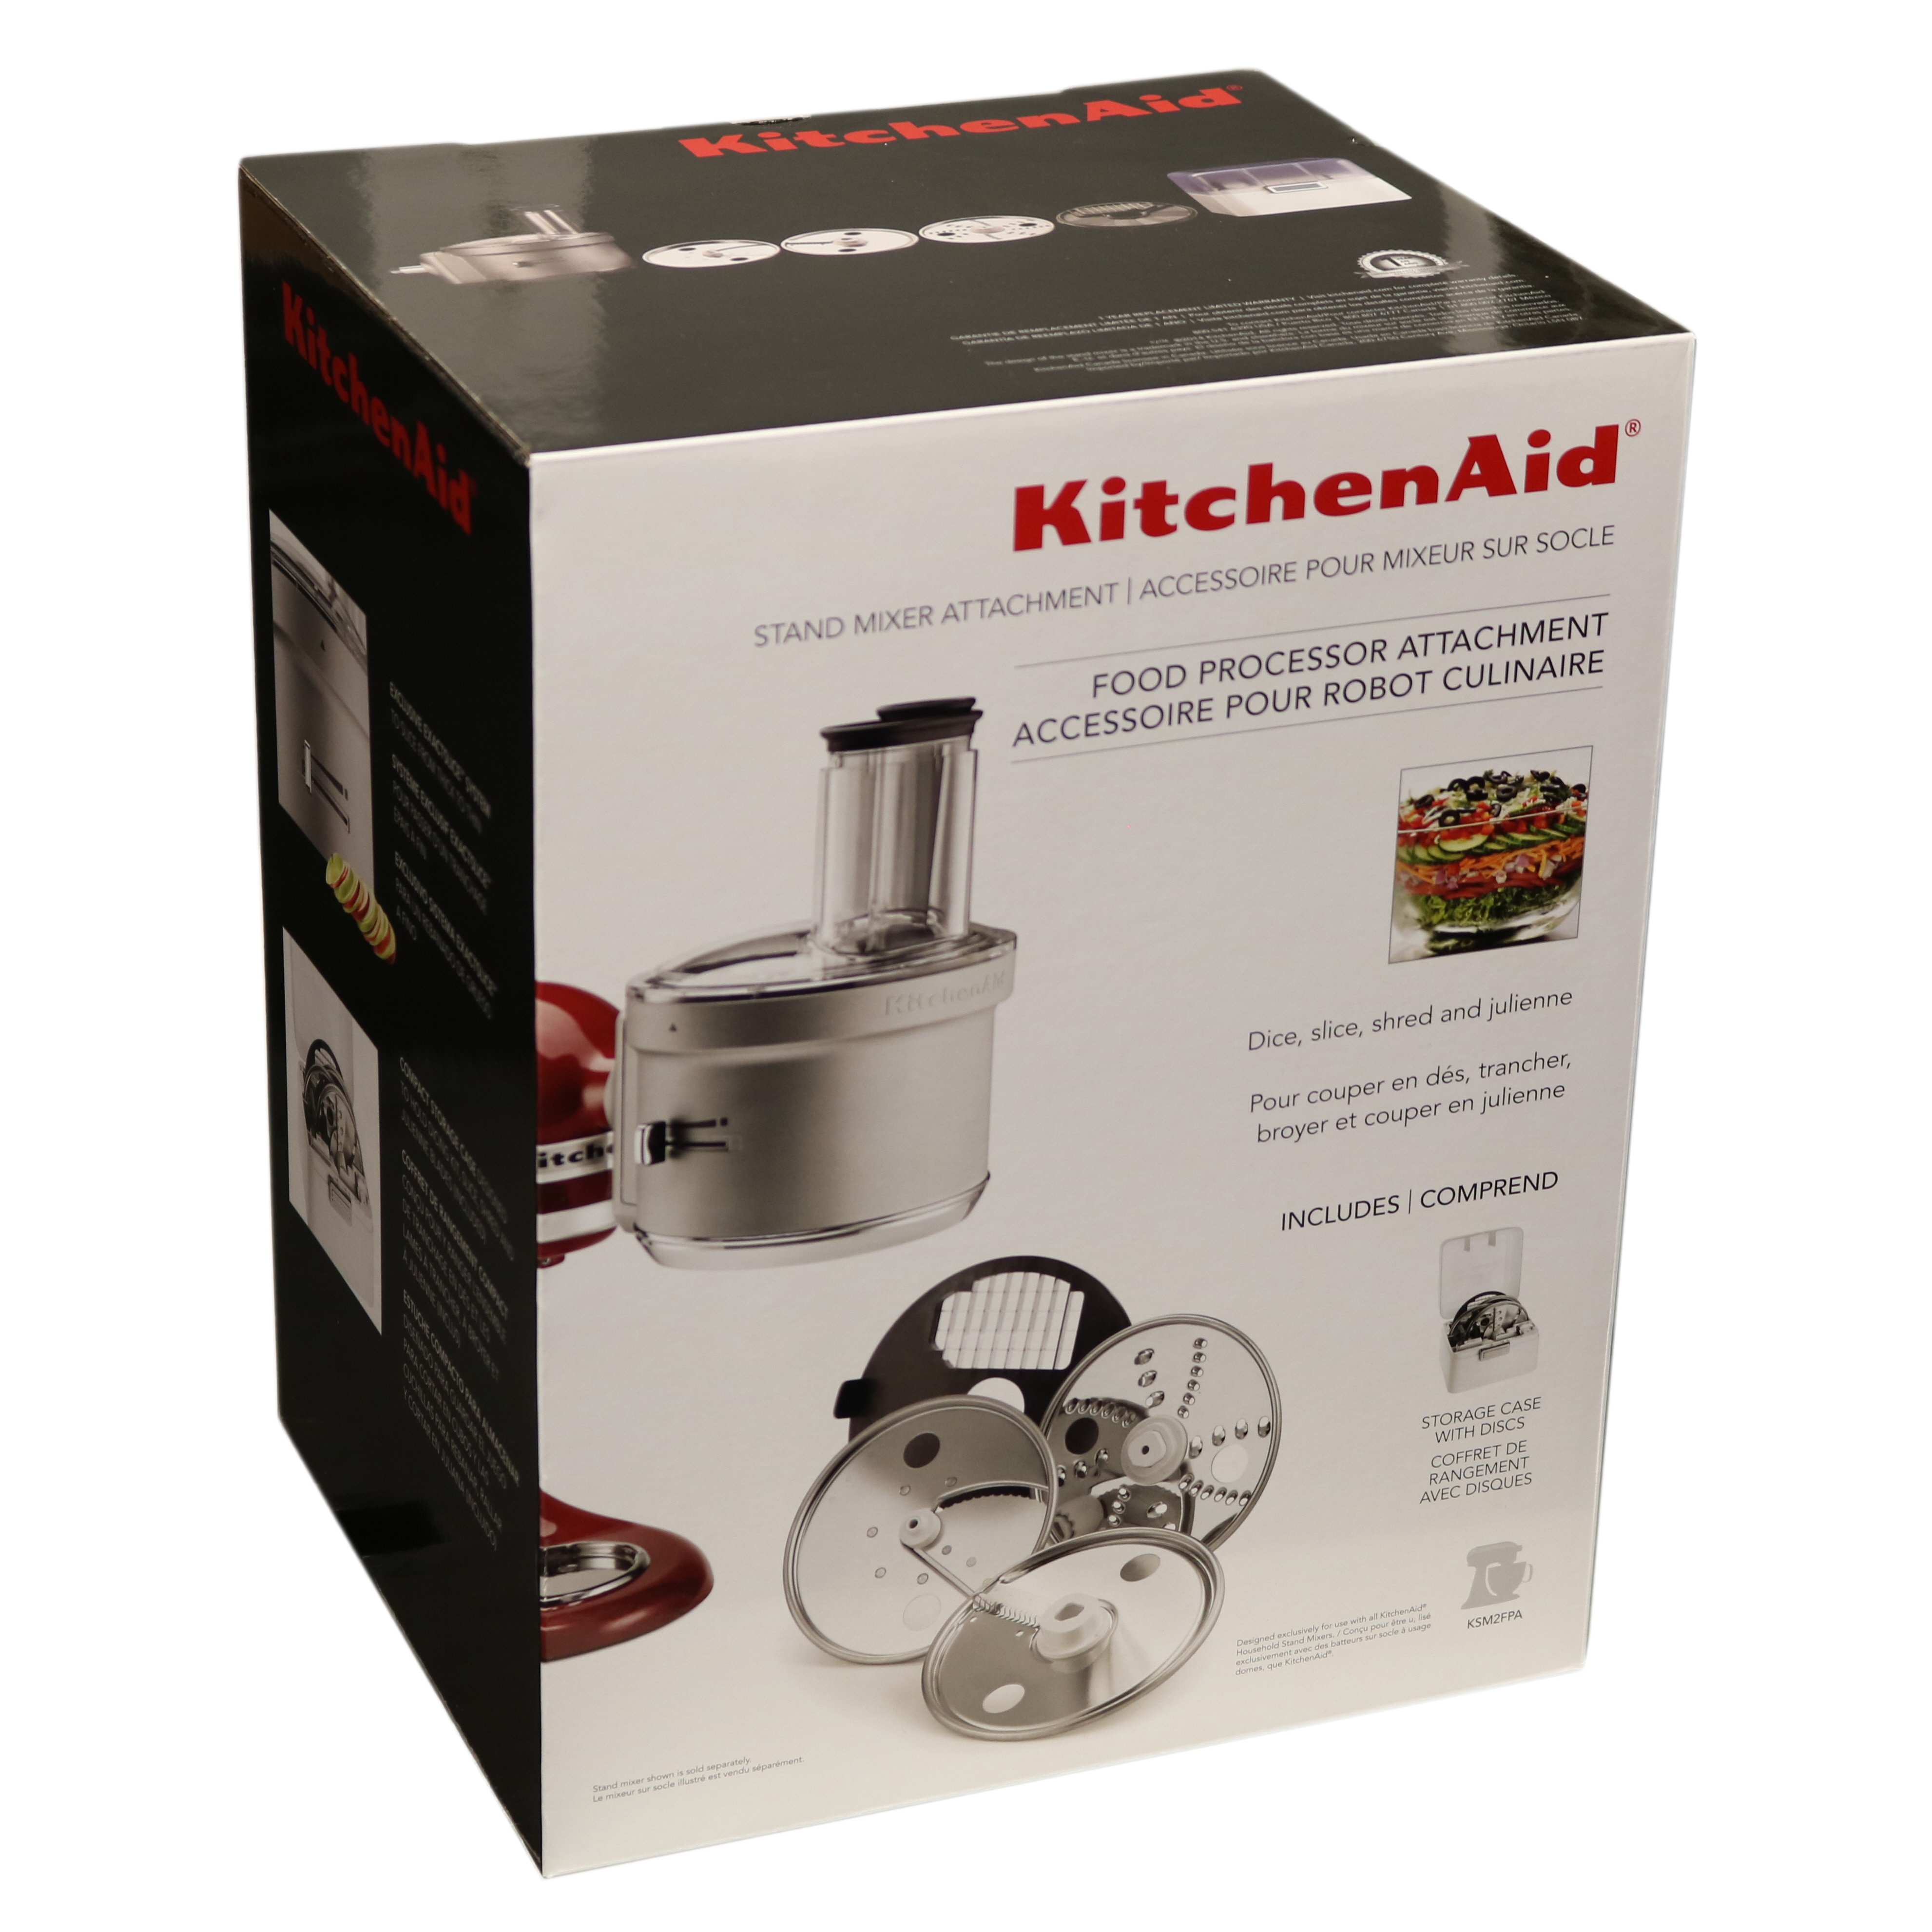 KitchenAid Food Processor Stand Mixer Attachment with Commercial